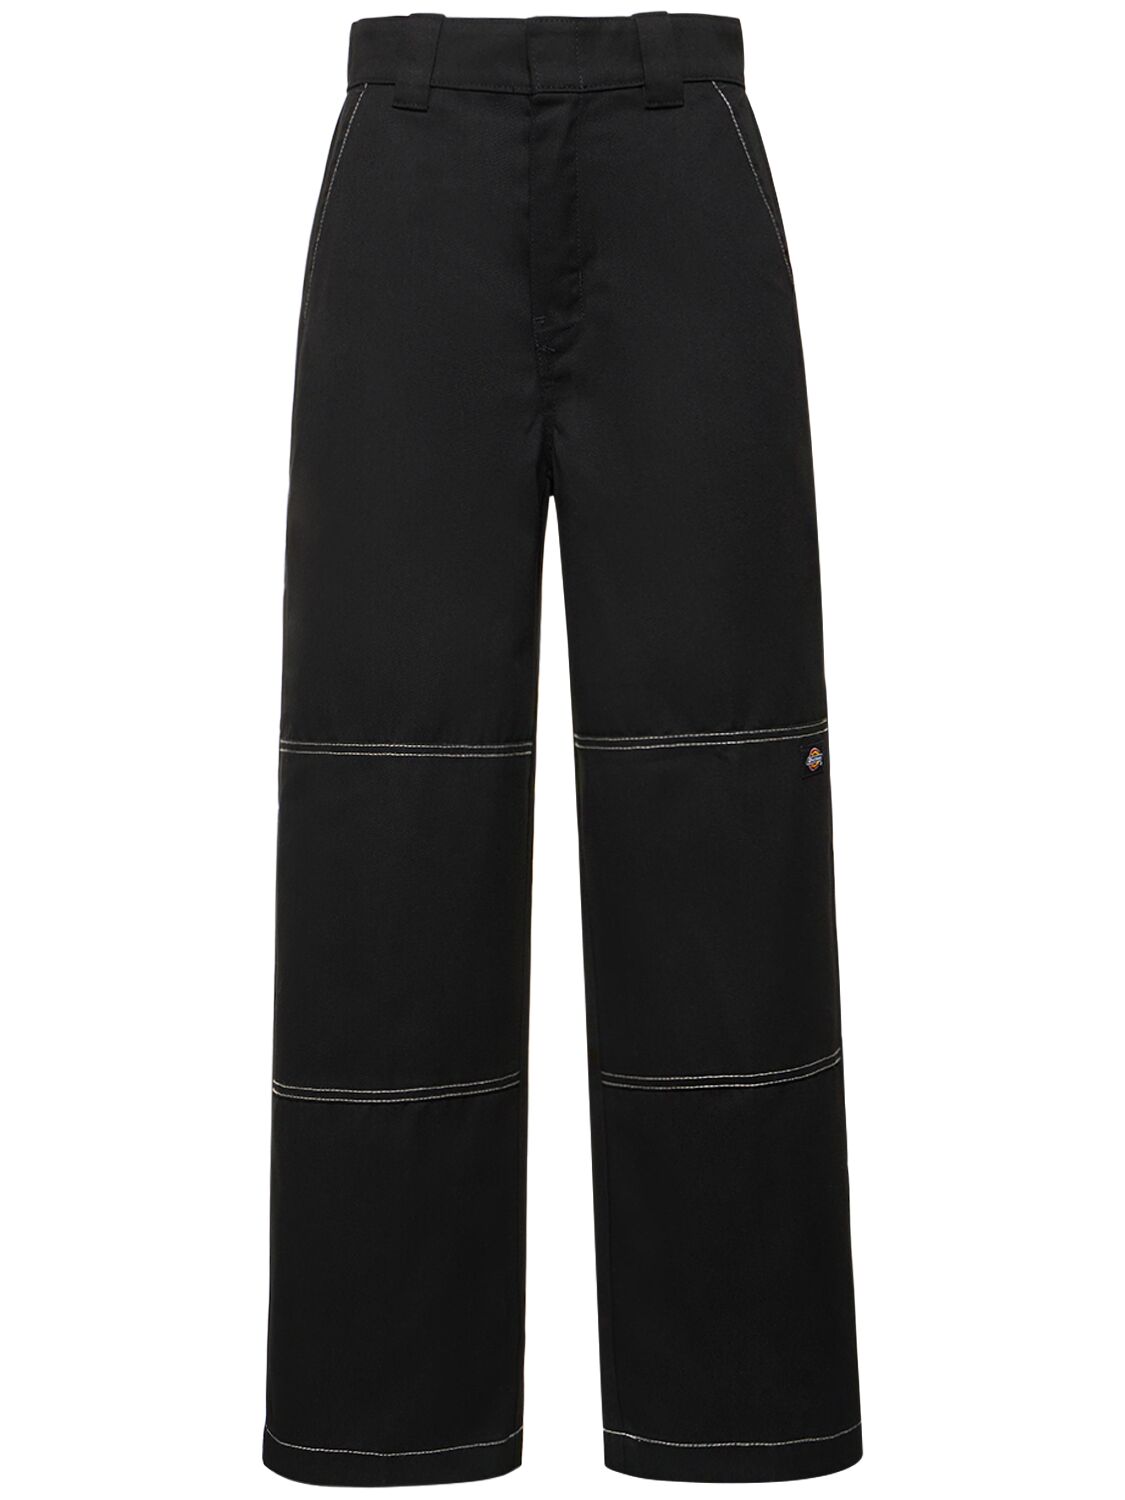 Image of Sawyerville Rec Relaxed Fit Pants